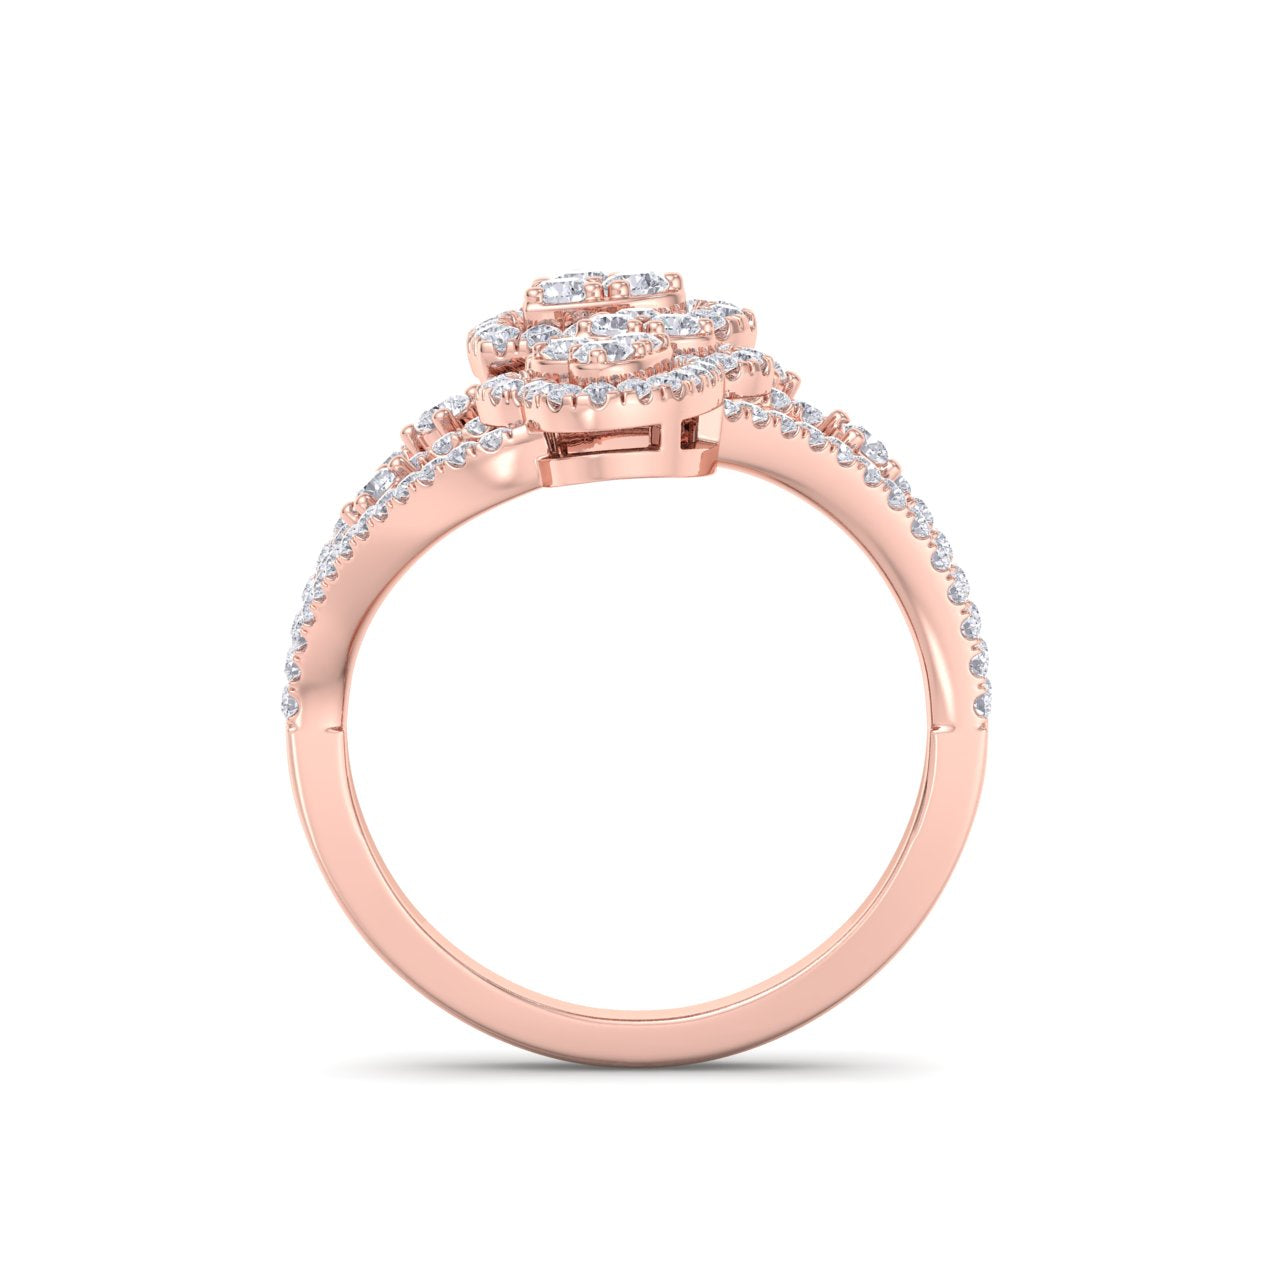 Heart statement ring in rose gold with white diamonds of 1.03 ct in weight